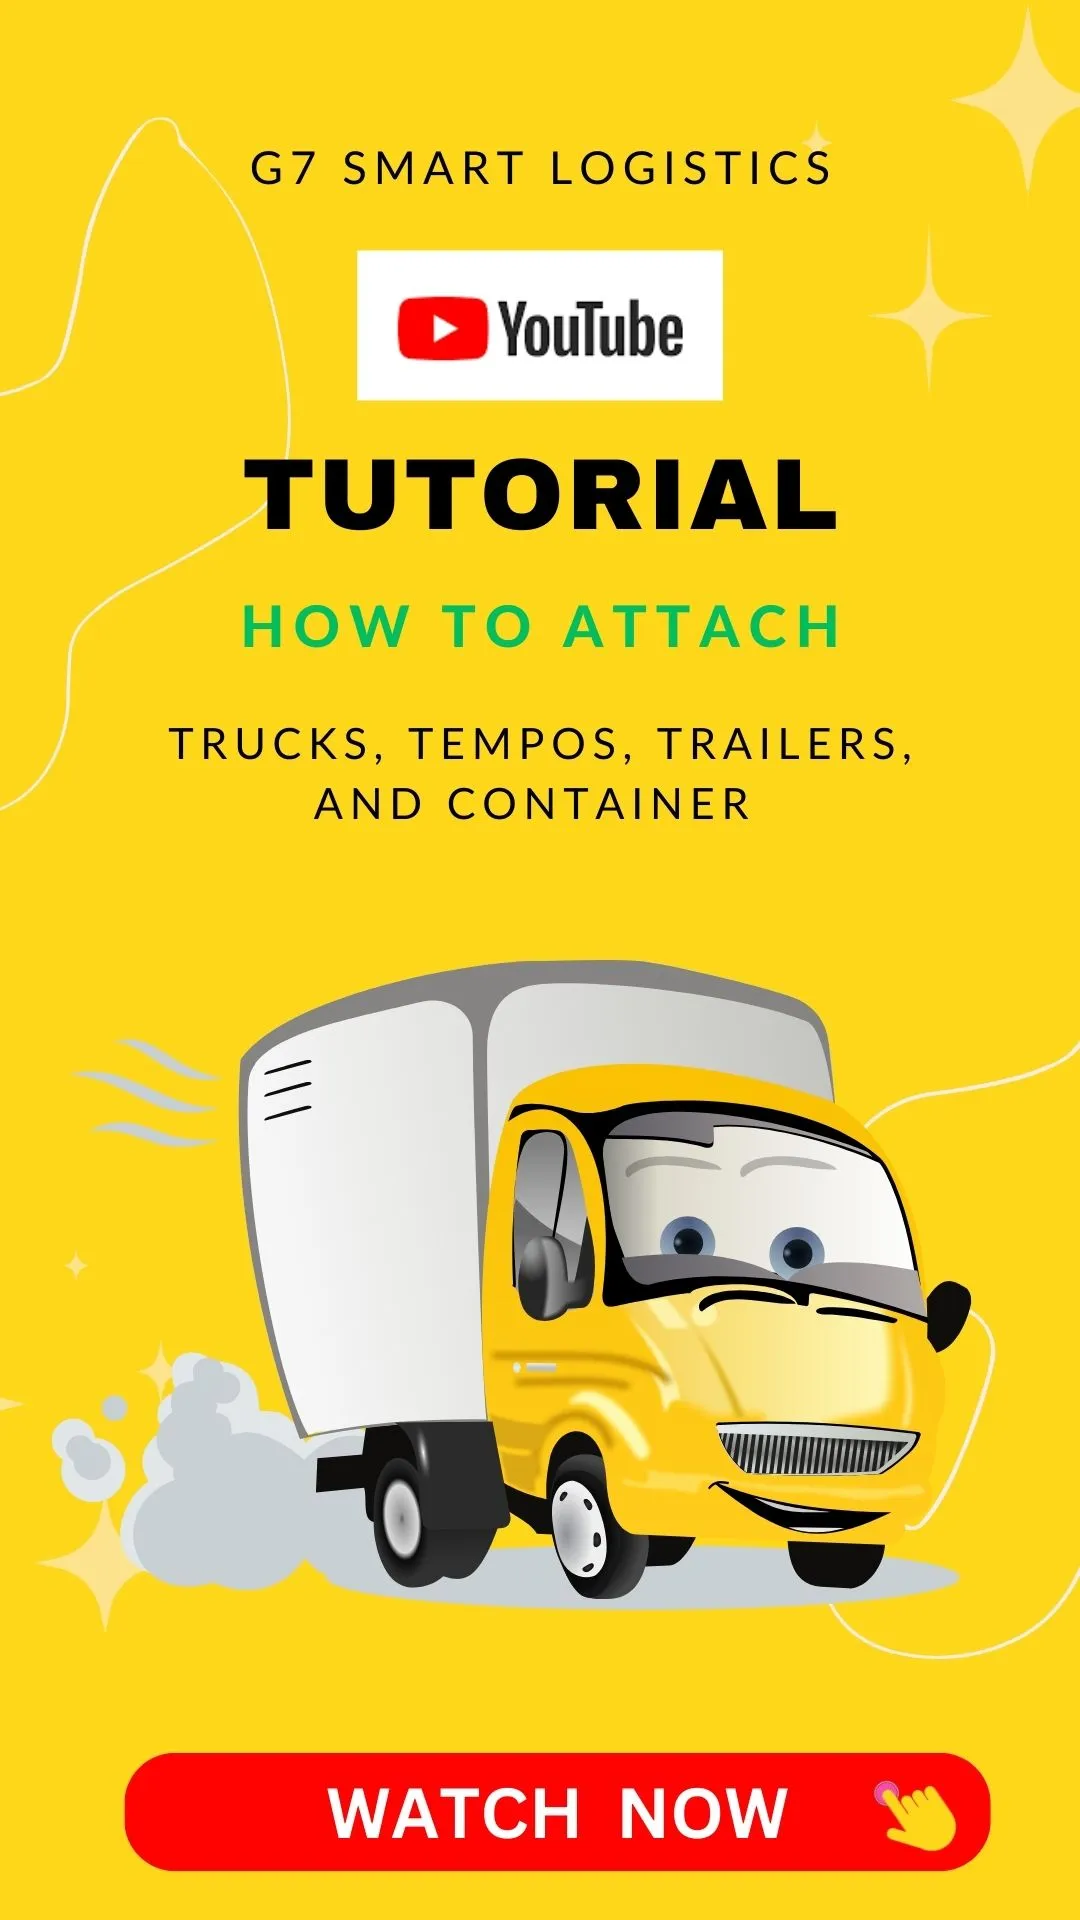 Video How to attach truck, tempo, trailers and containers on G7 app